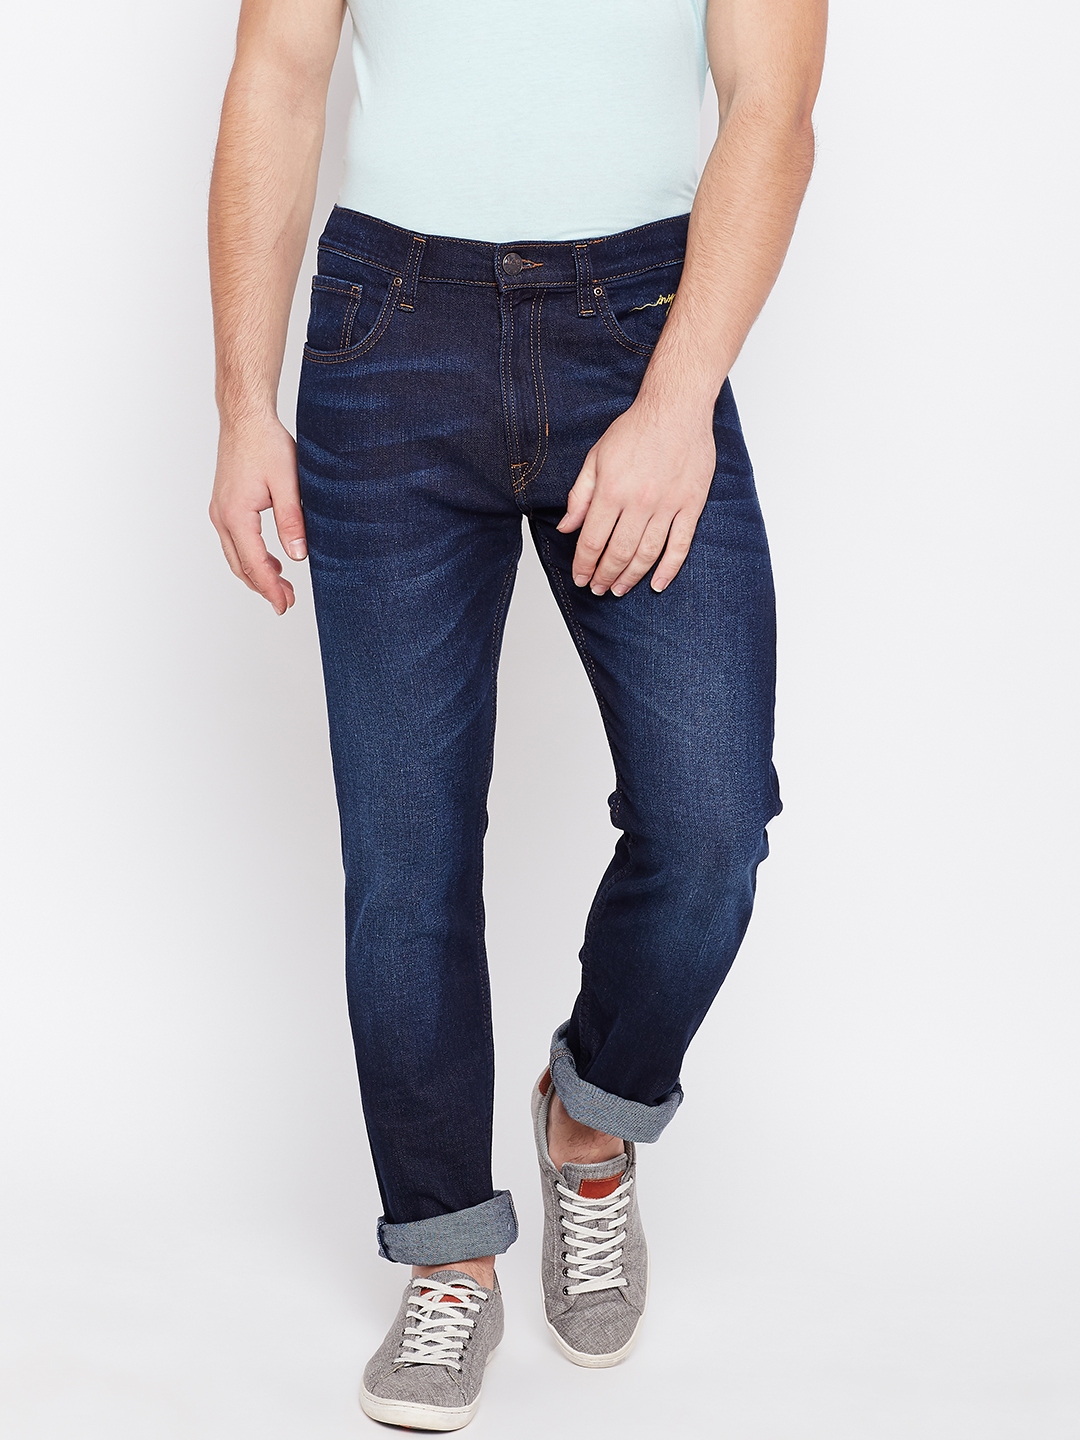 Buy Lee Men Navy Macky Fit Mid Rise Clean Look Stretchable Jeans Jeans For Men 2179280 Myntra 